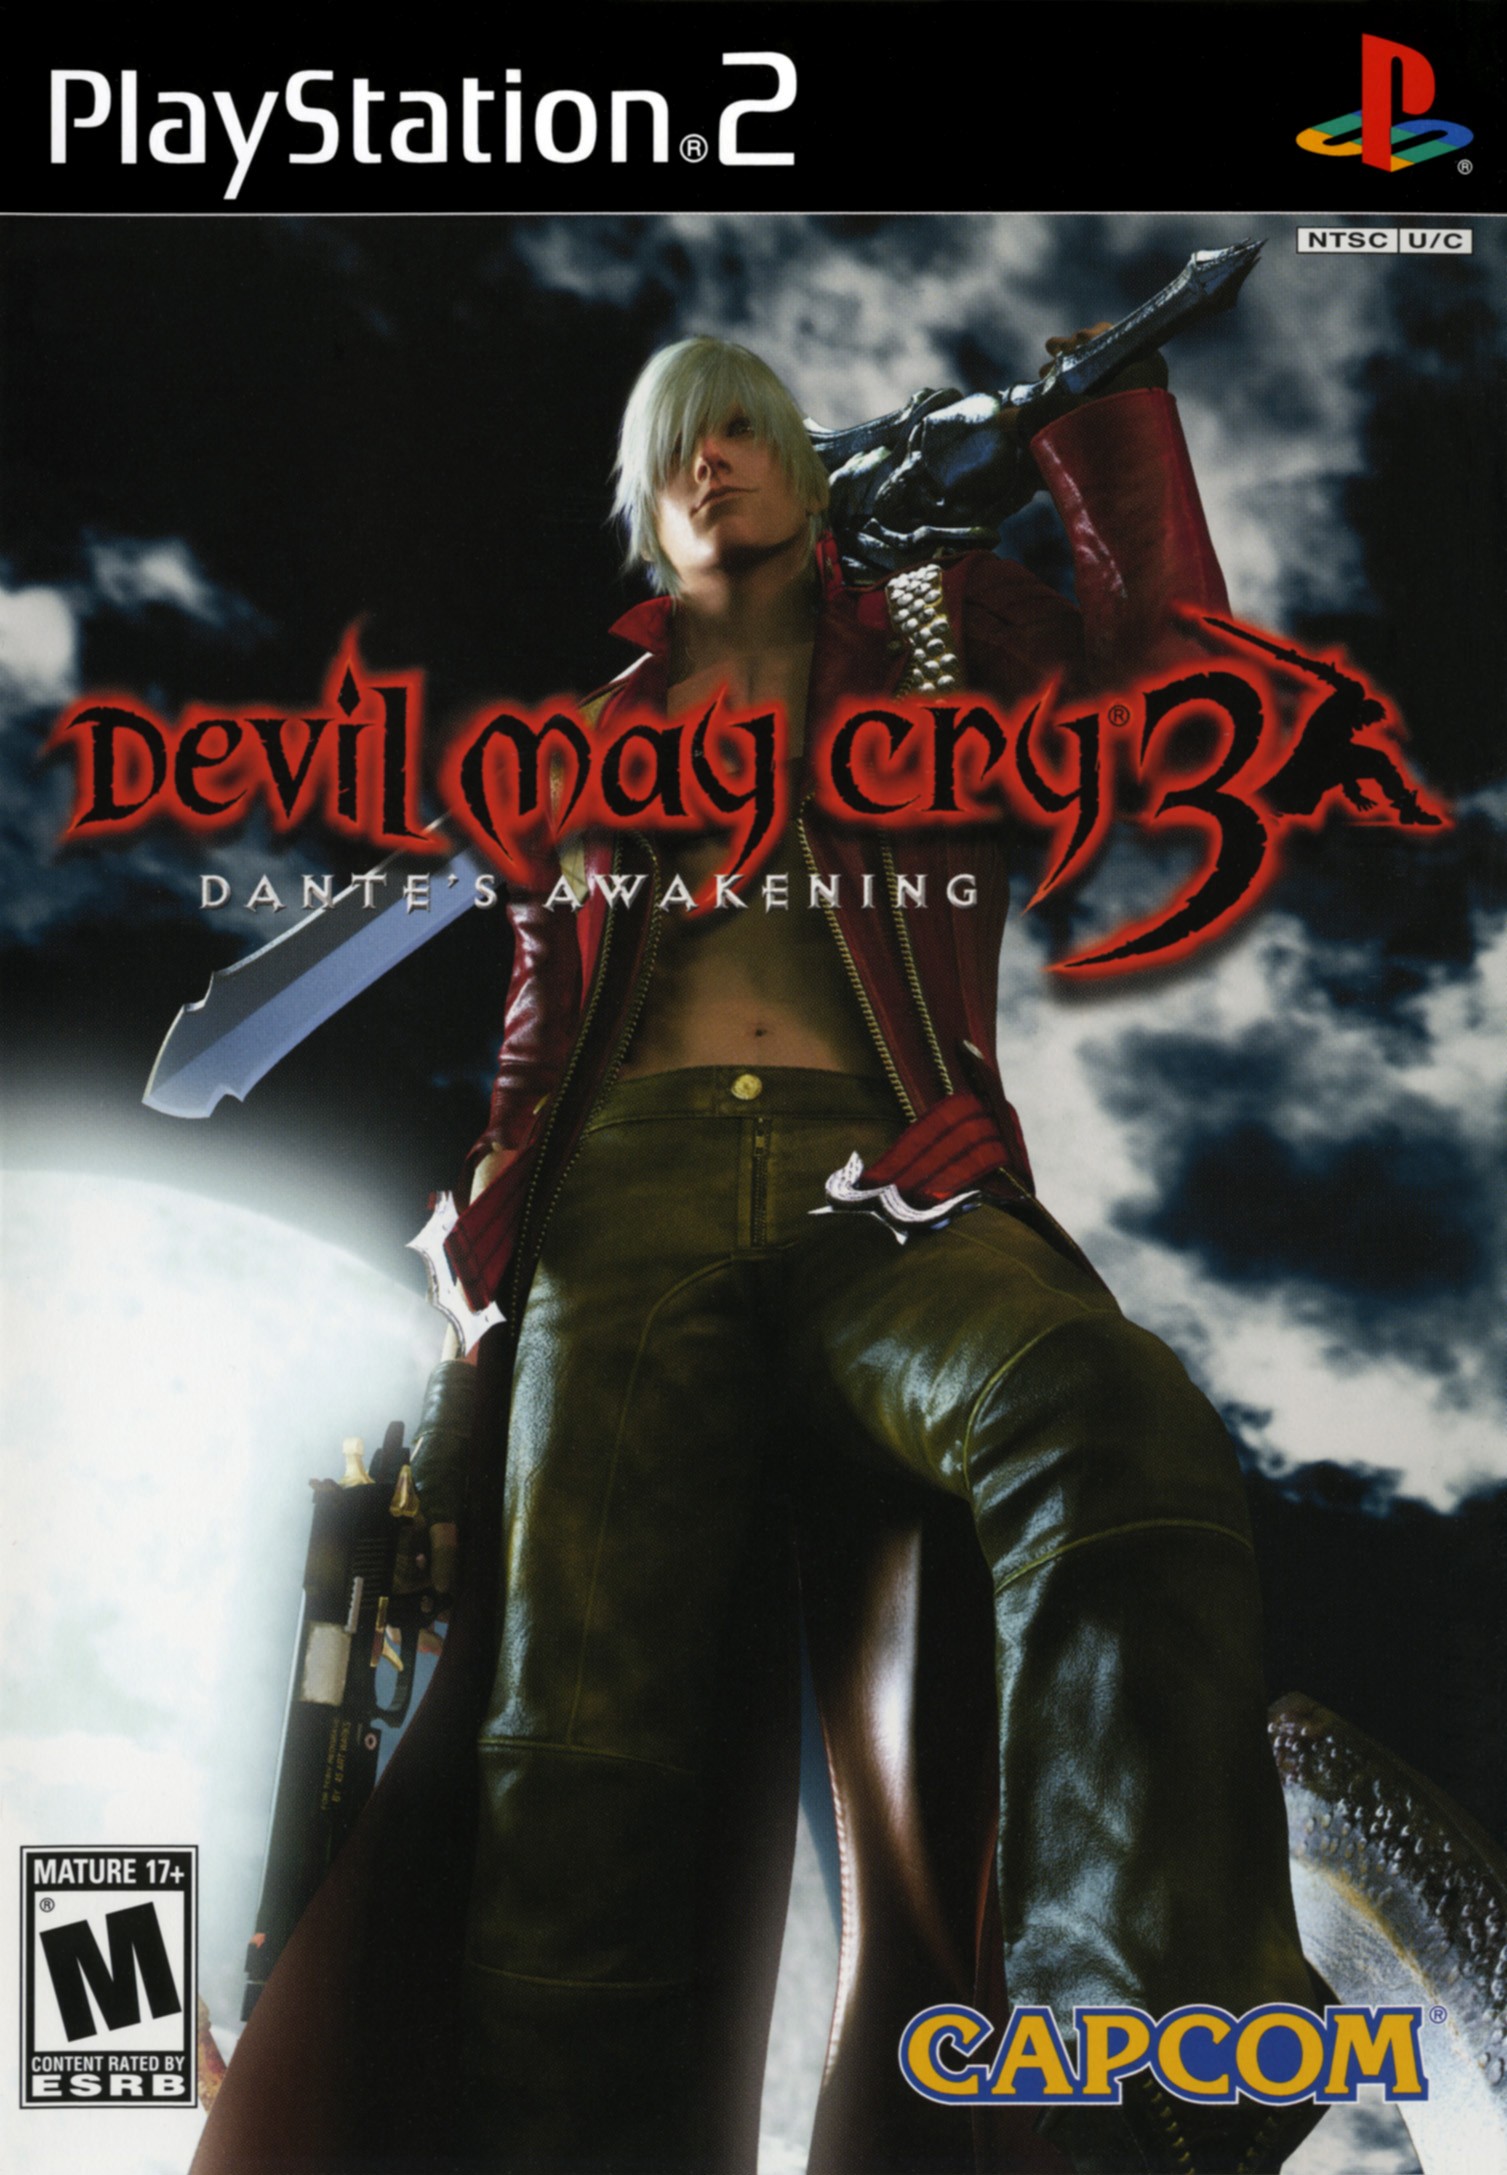 devil may cry hd collection pc fix